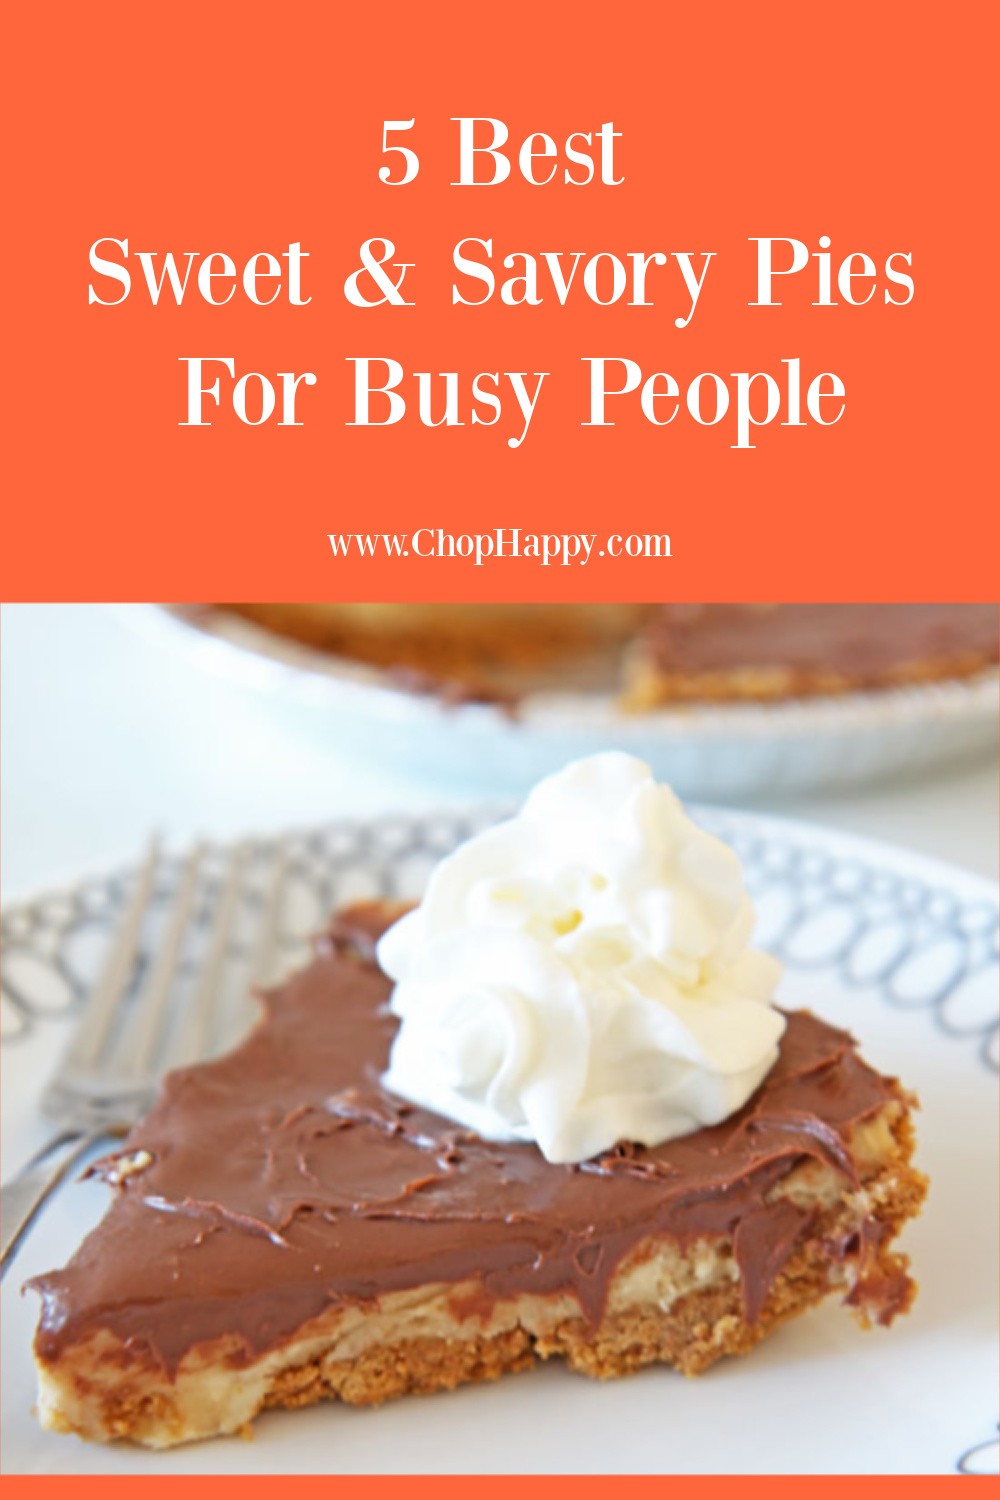 5 Best Sweet and Savory Pies For Busy People. Meatball pie, lemon pie, peanut butter pie, and more. This is no bake pies for busy people. www.ChopHappy.com #pies #nobakedesserts